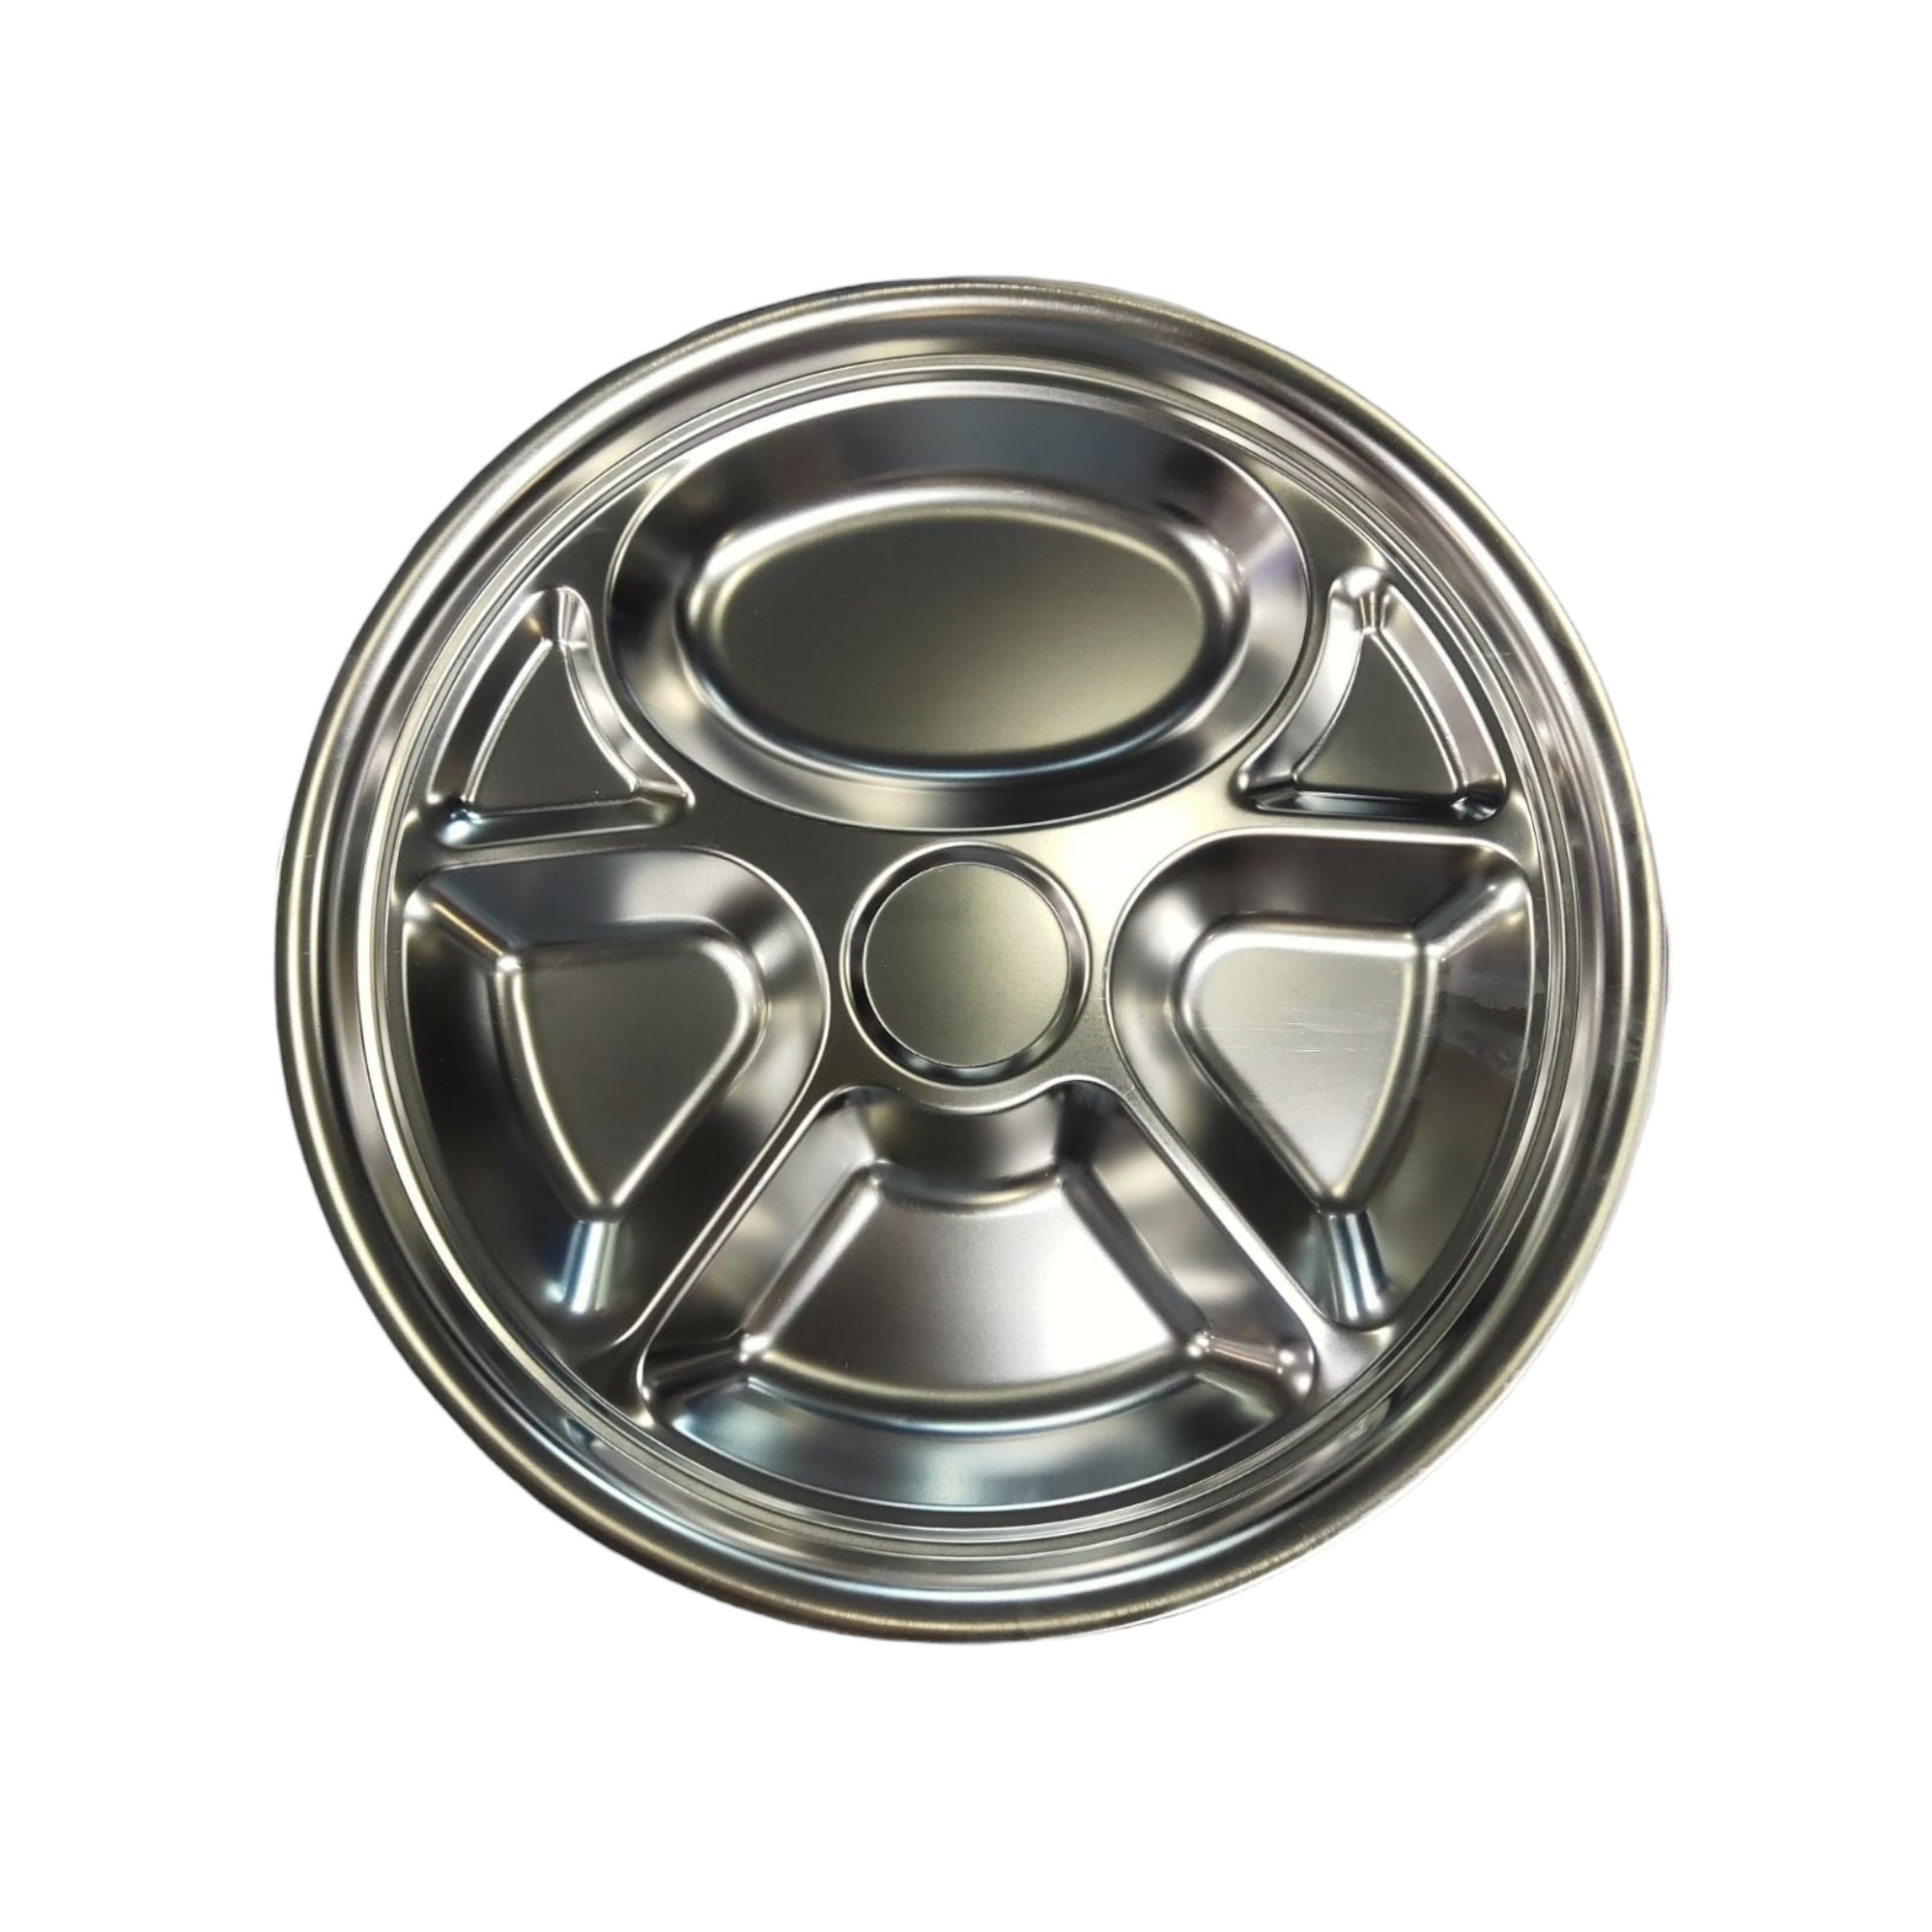 Stainless Steel Snack Tray - Serving Dinner Plate 35cm Big 7 Division-Round